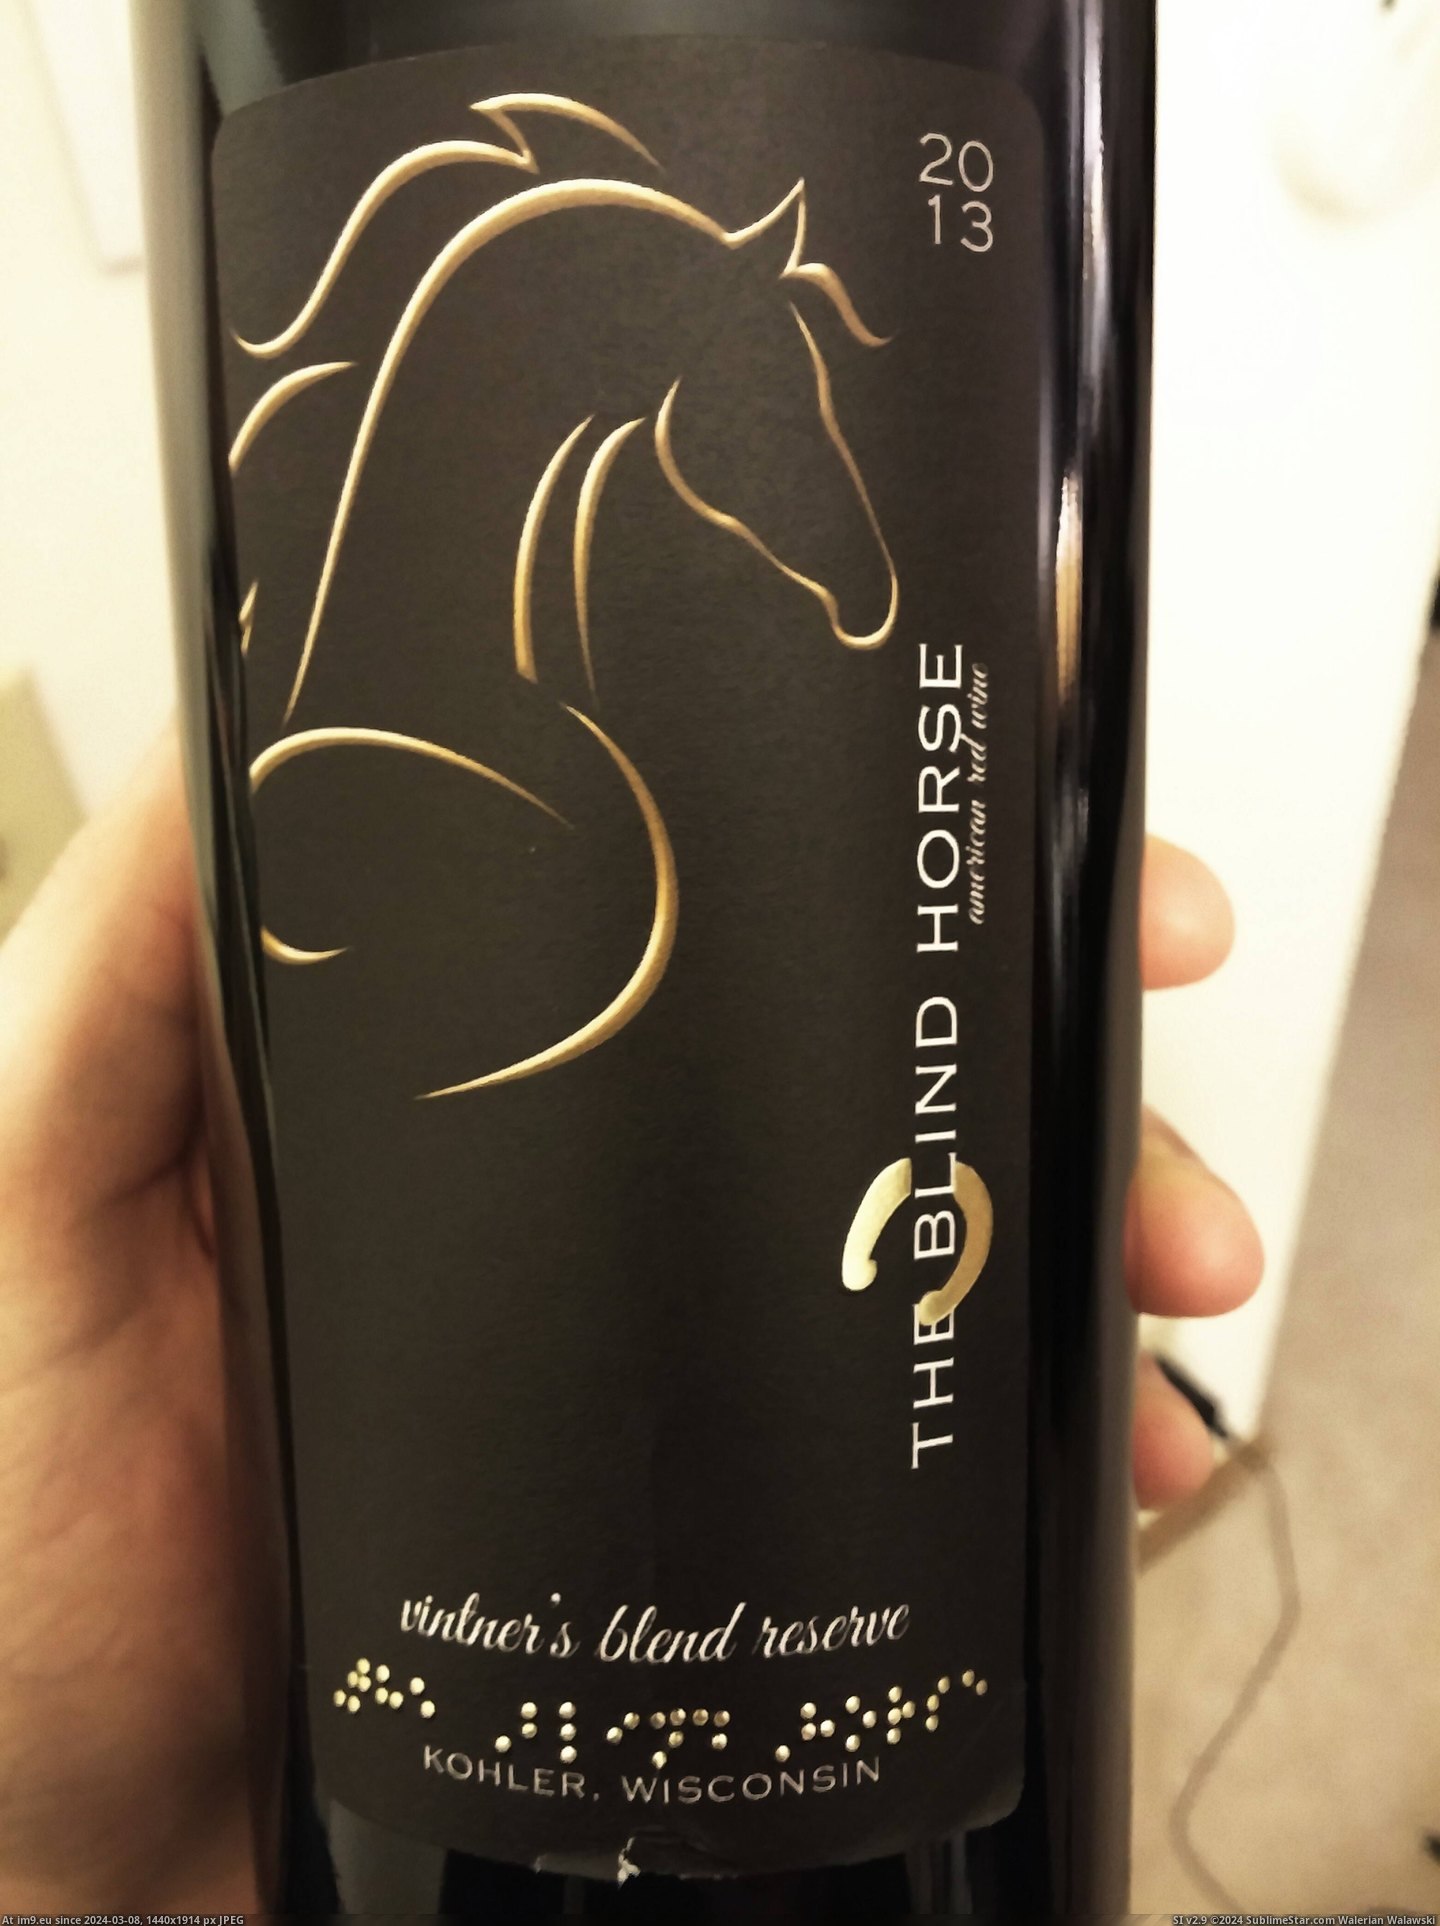 #Honor #Bottle #Horse #Actual #Label #Dots #Braille #Wine #Raised #Blind [Mildlyinteresting] This wine bottle label has actual raised Braille dots to honor the name of the winery, 'The Blind Horse.' Pic. (Obraz z album My r/MILDLYINTERESTING favs))